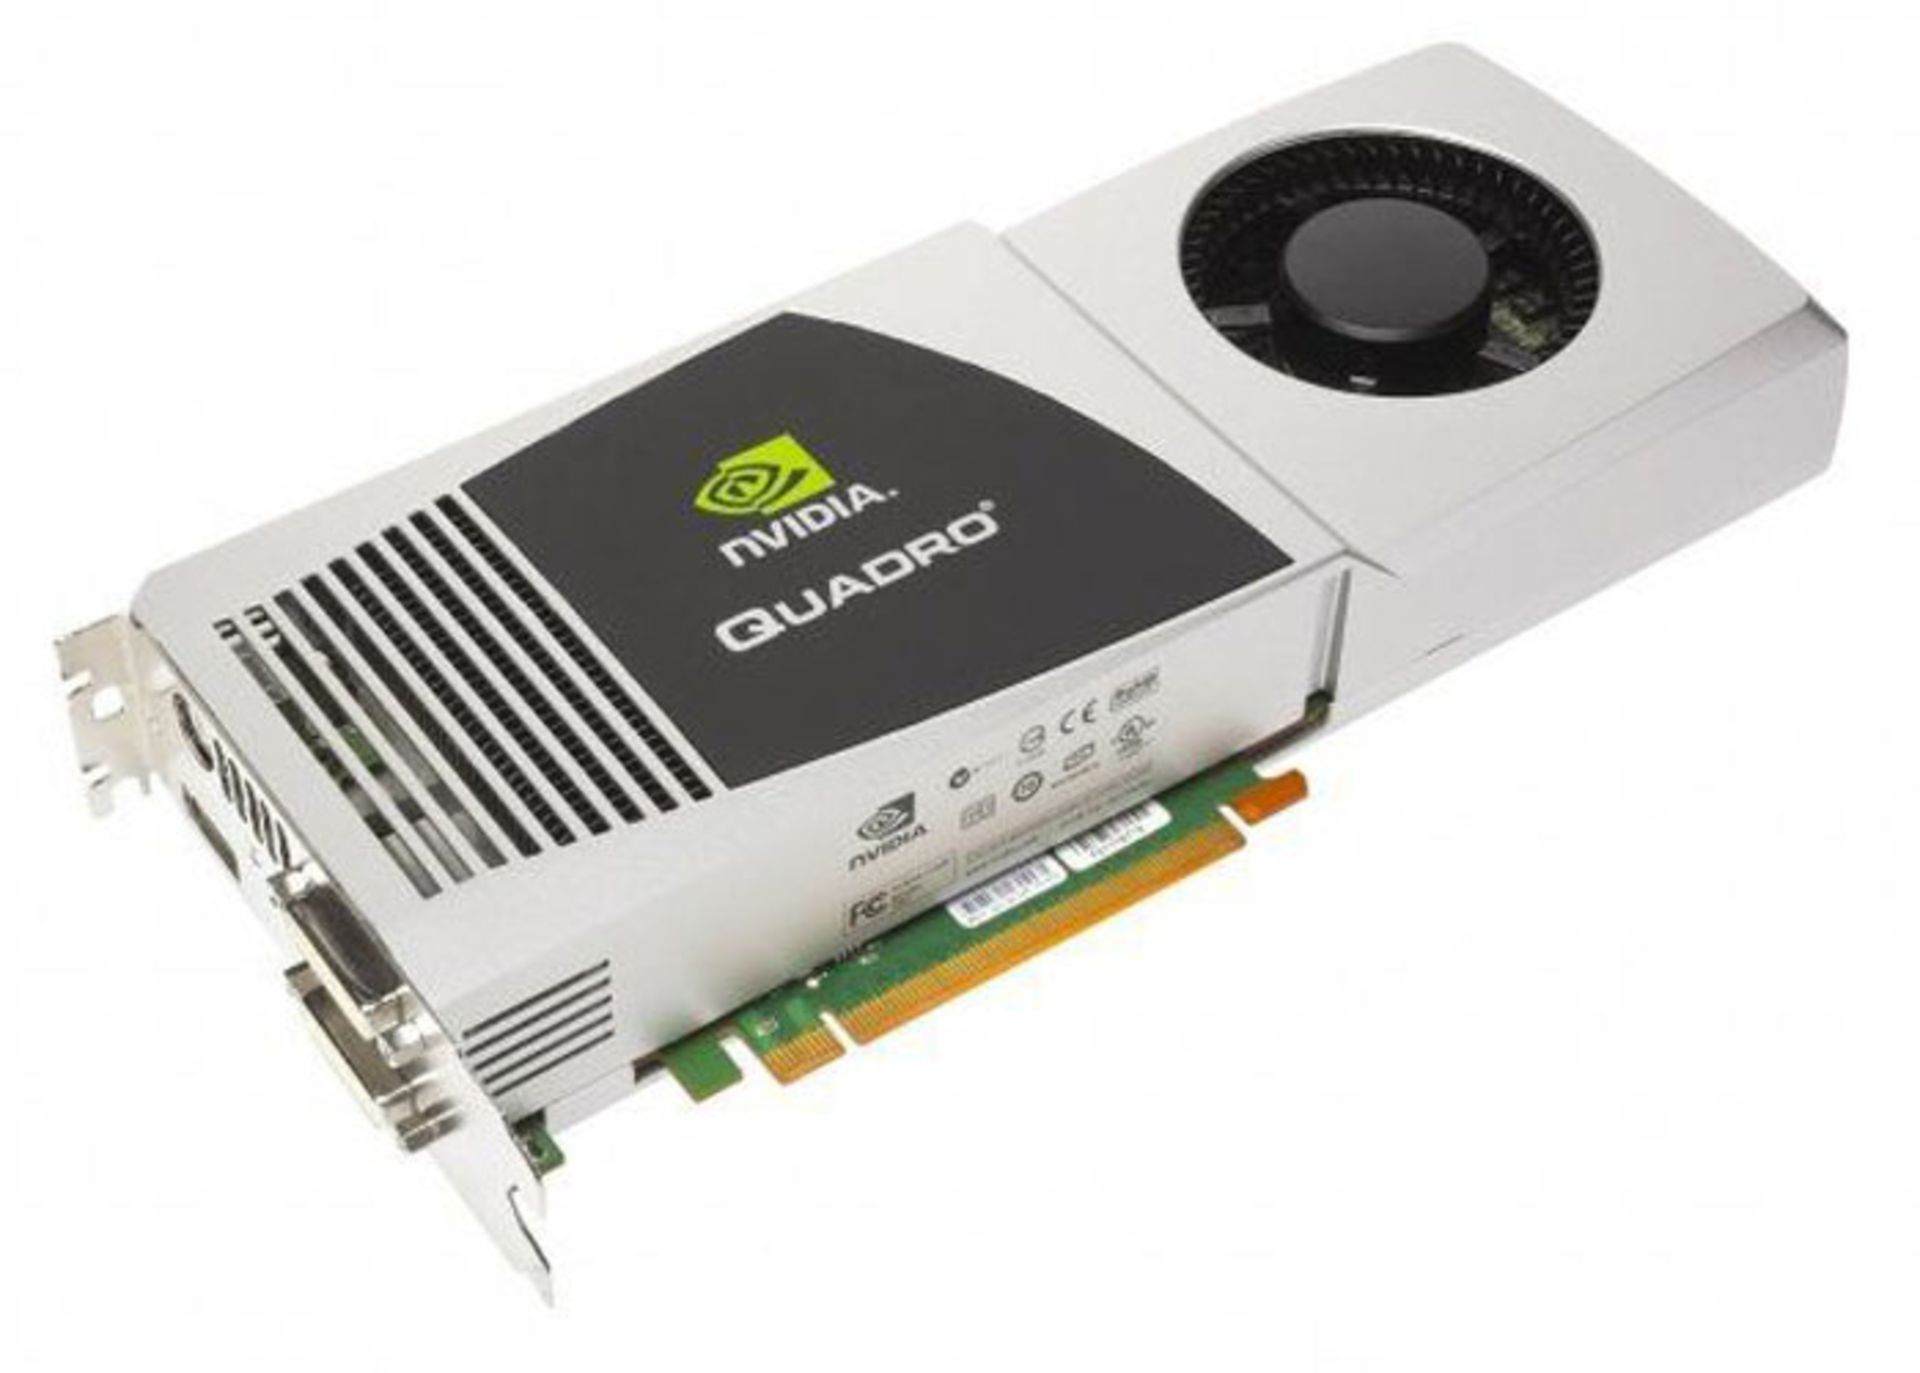 Matrox Developing Embedded Graphics Cards With NVIDIA